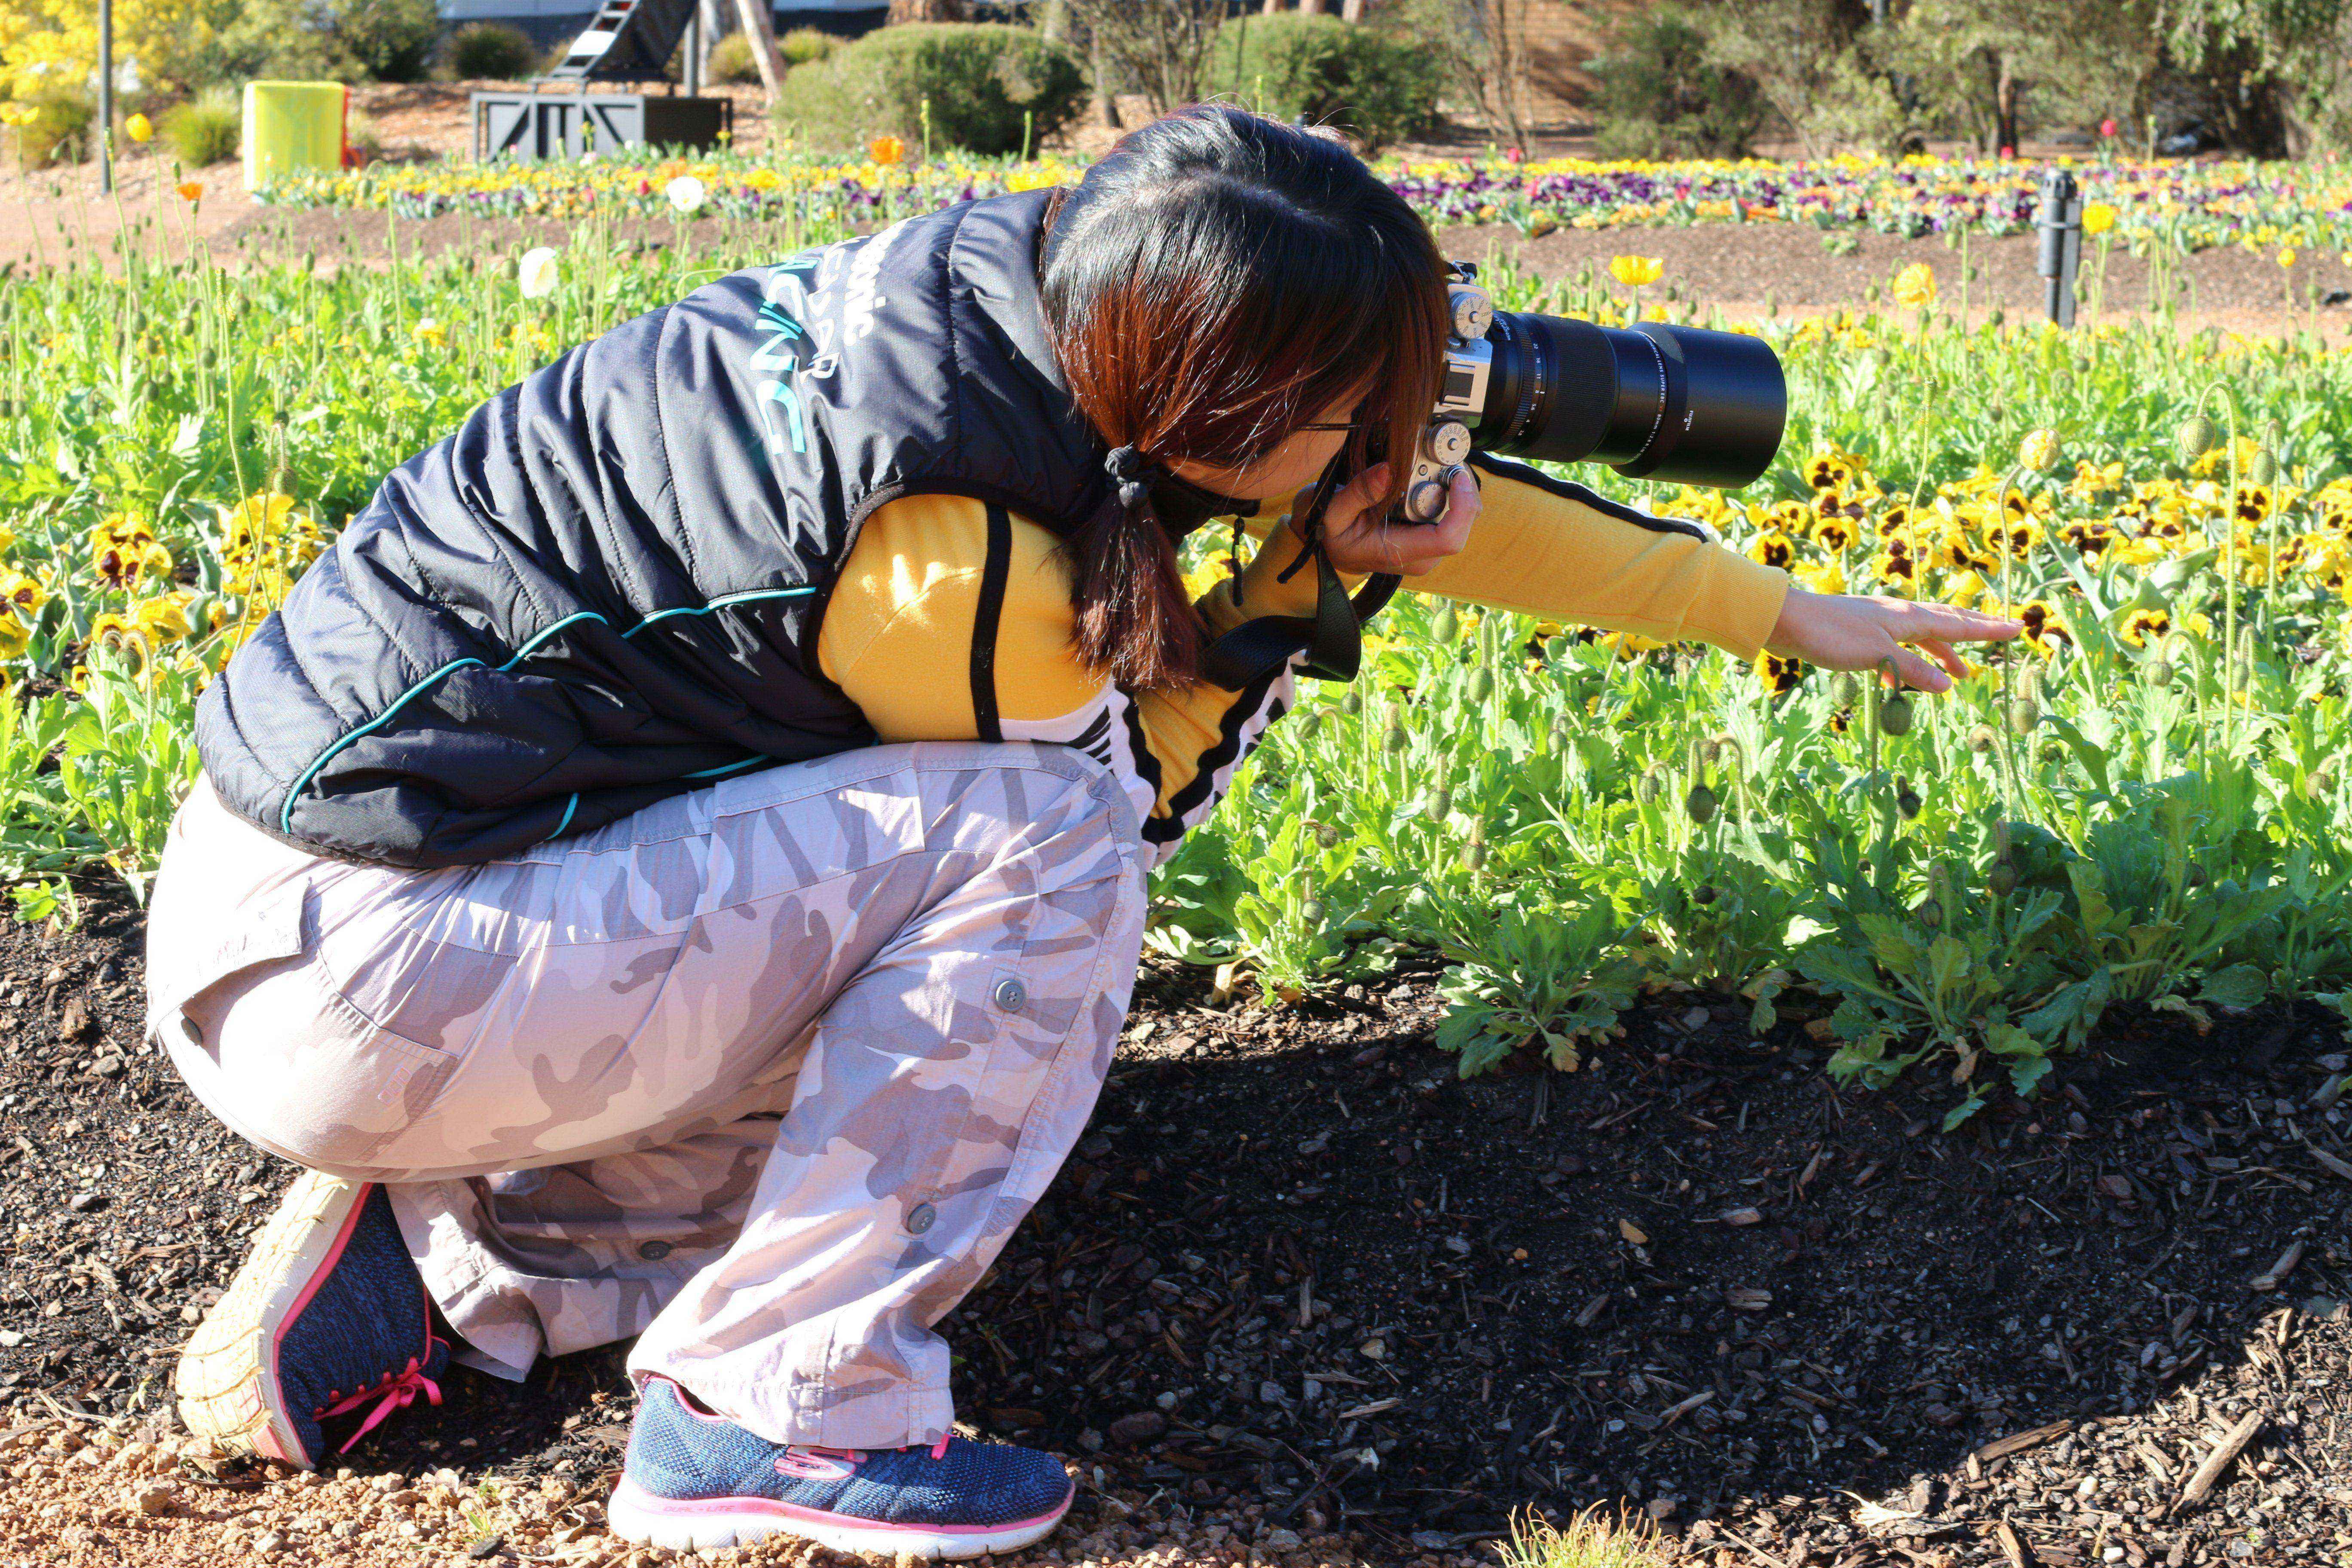 Finding focus when you photograph the Floriade floral frenzy